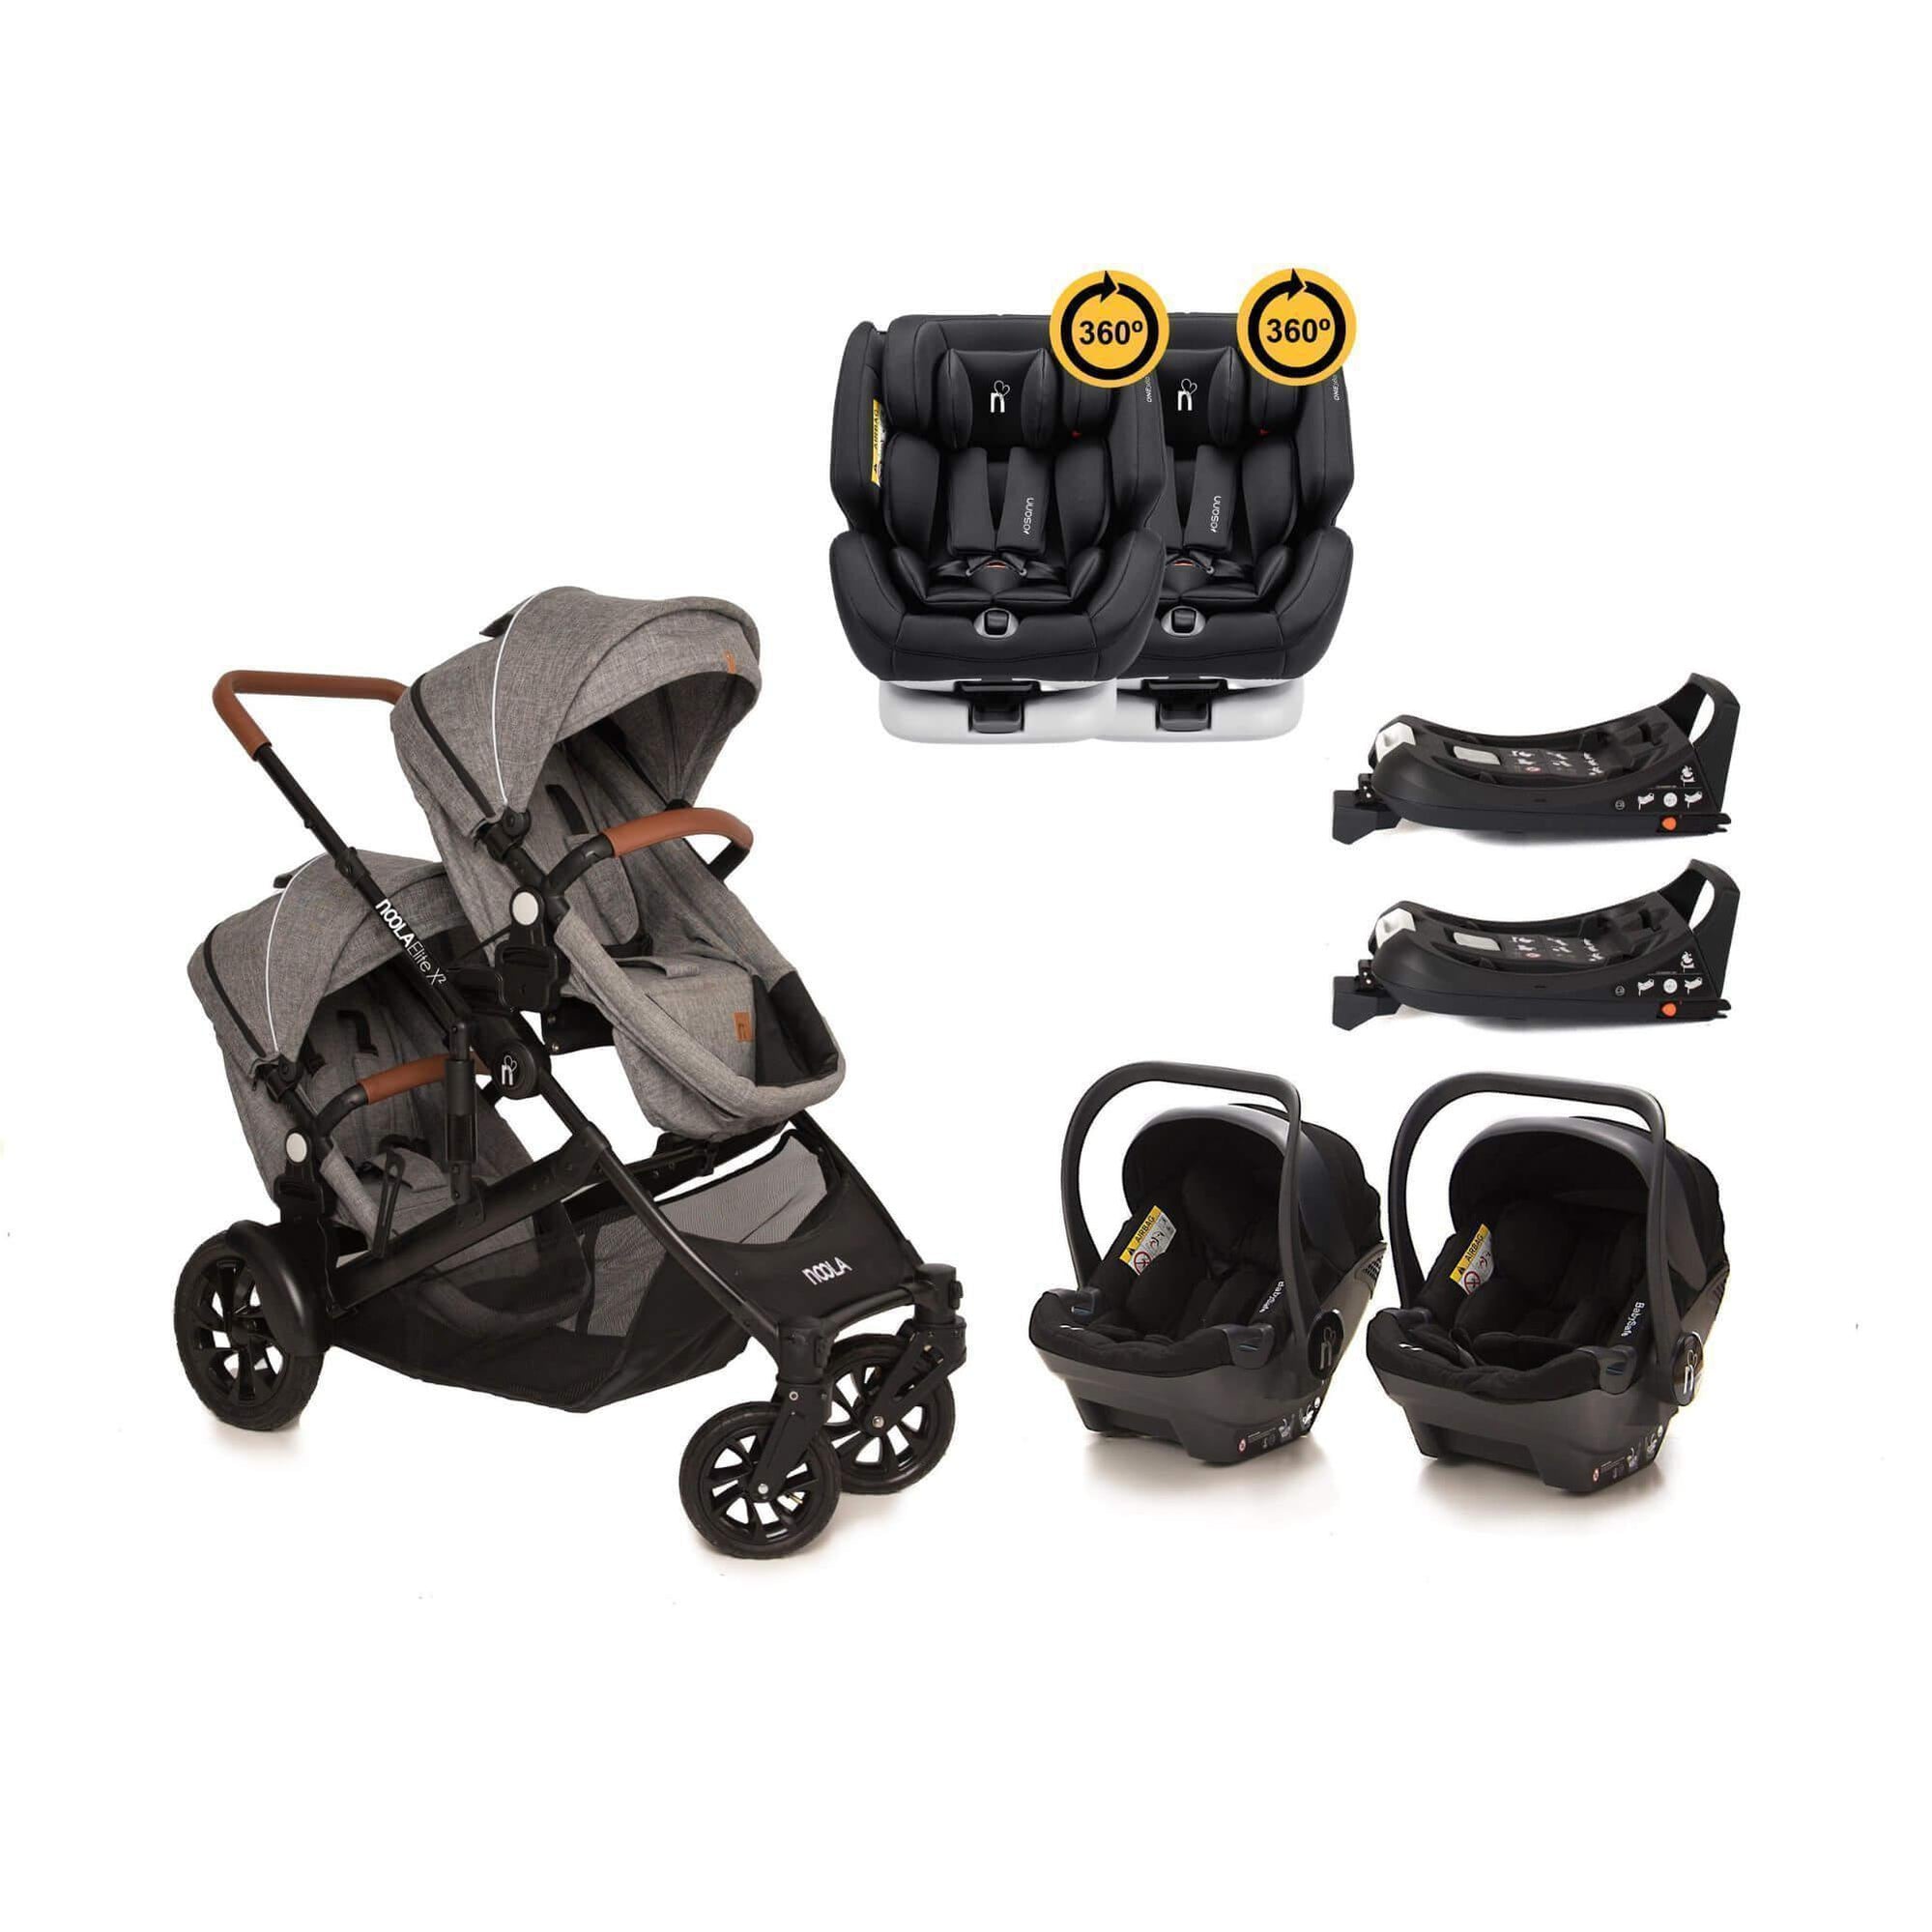 noola elitex2 twin travel system baby stroller grey #SELECT THE COLOUR OF YOUR 2X ONE360_ONE360 | MIDNIGHT BLACK